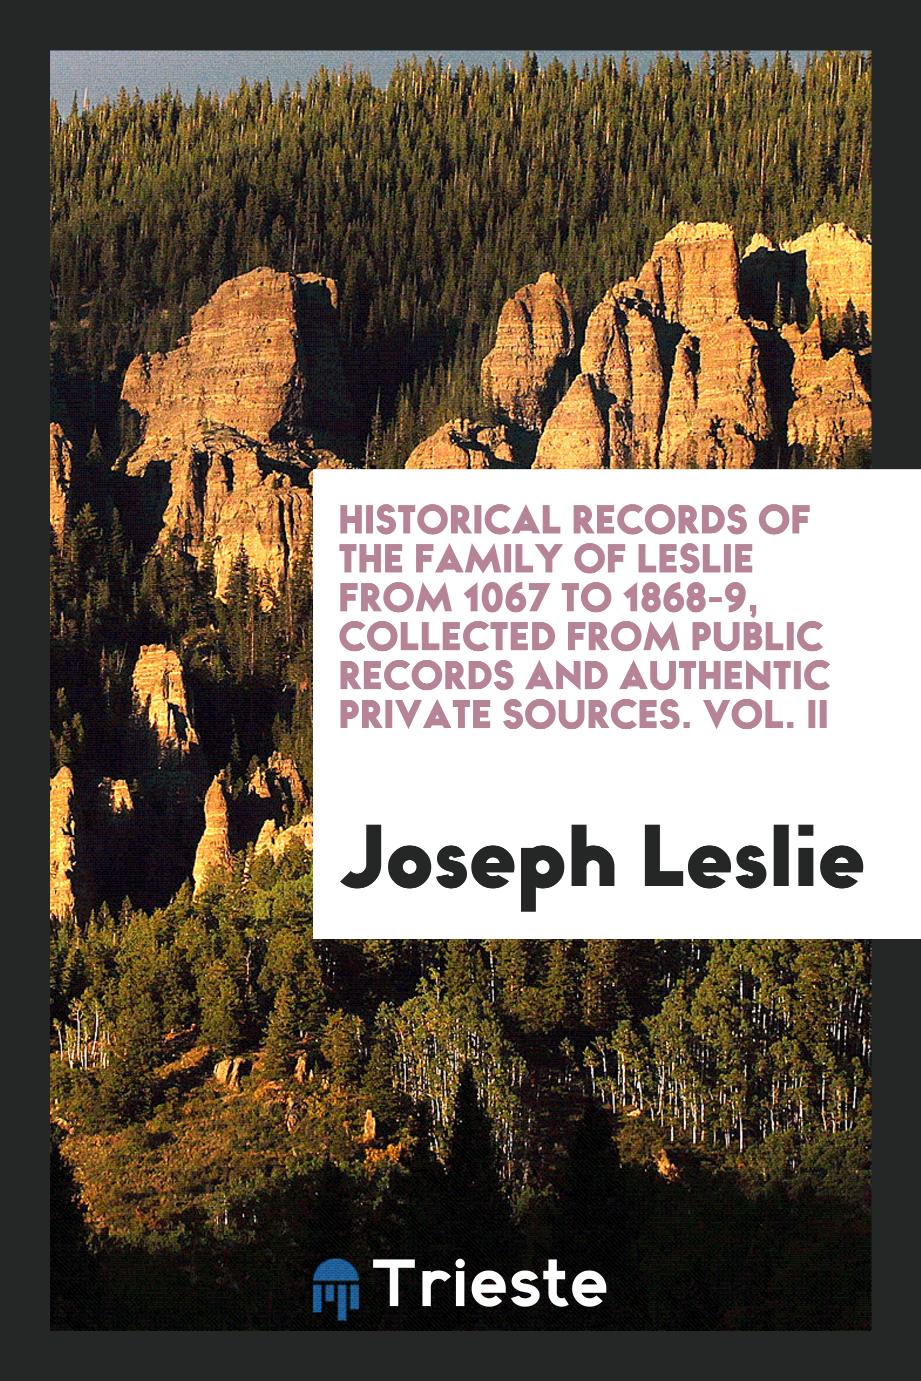 Historical records of the family of Leslie from 1067 to 1868-9, collected from public records and authentic private sources. Vol. II